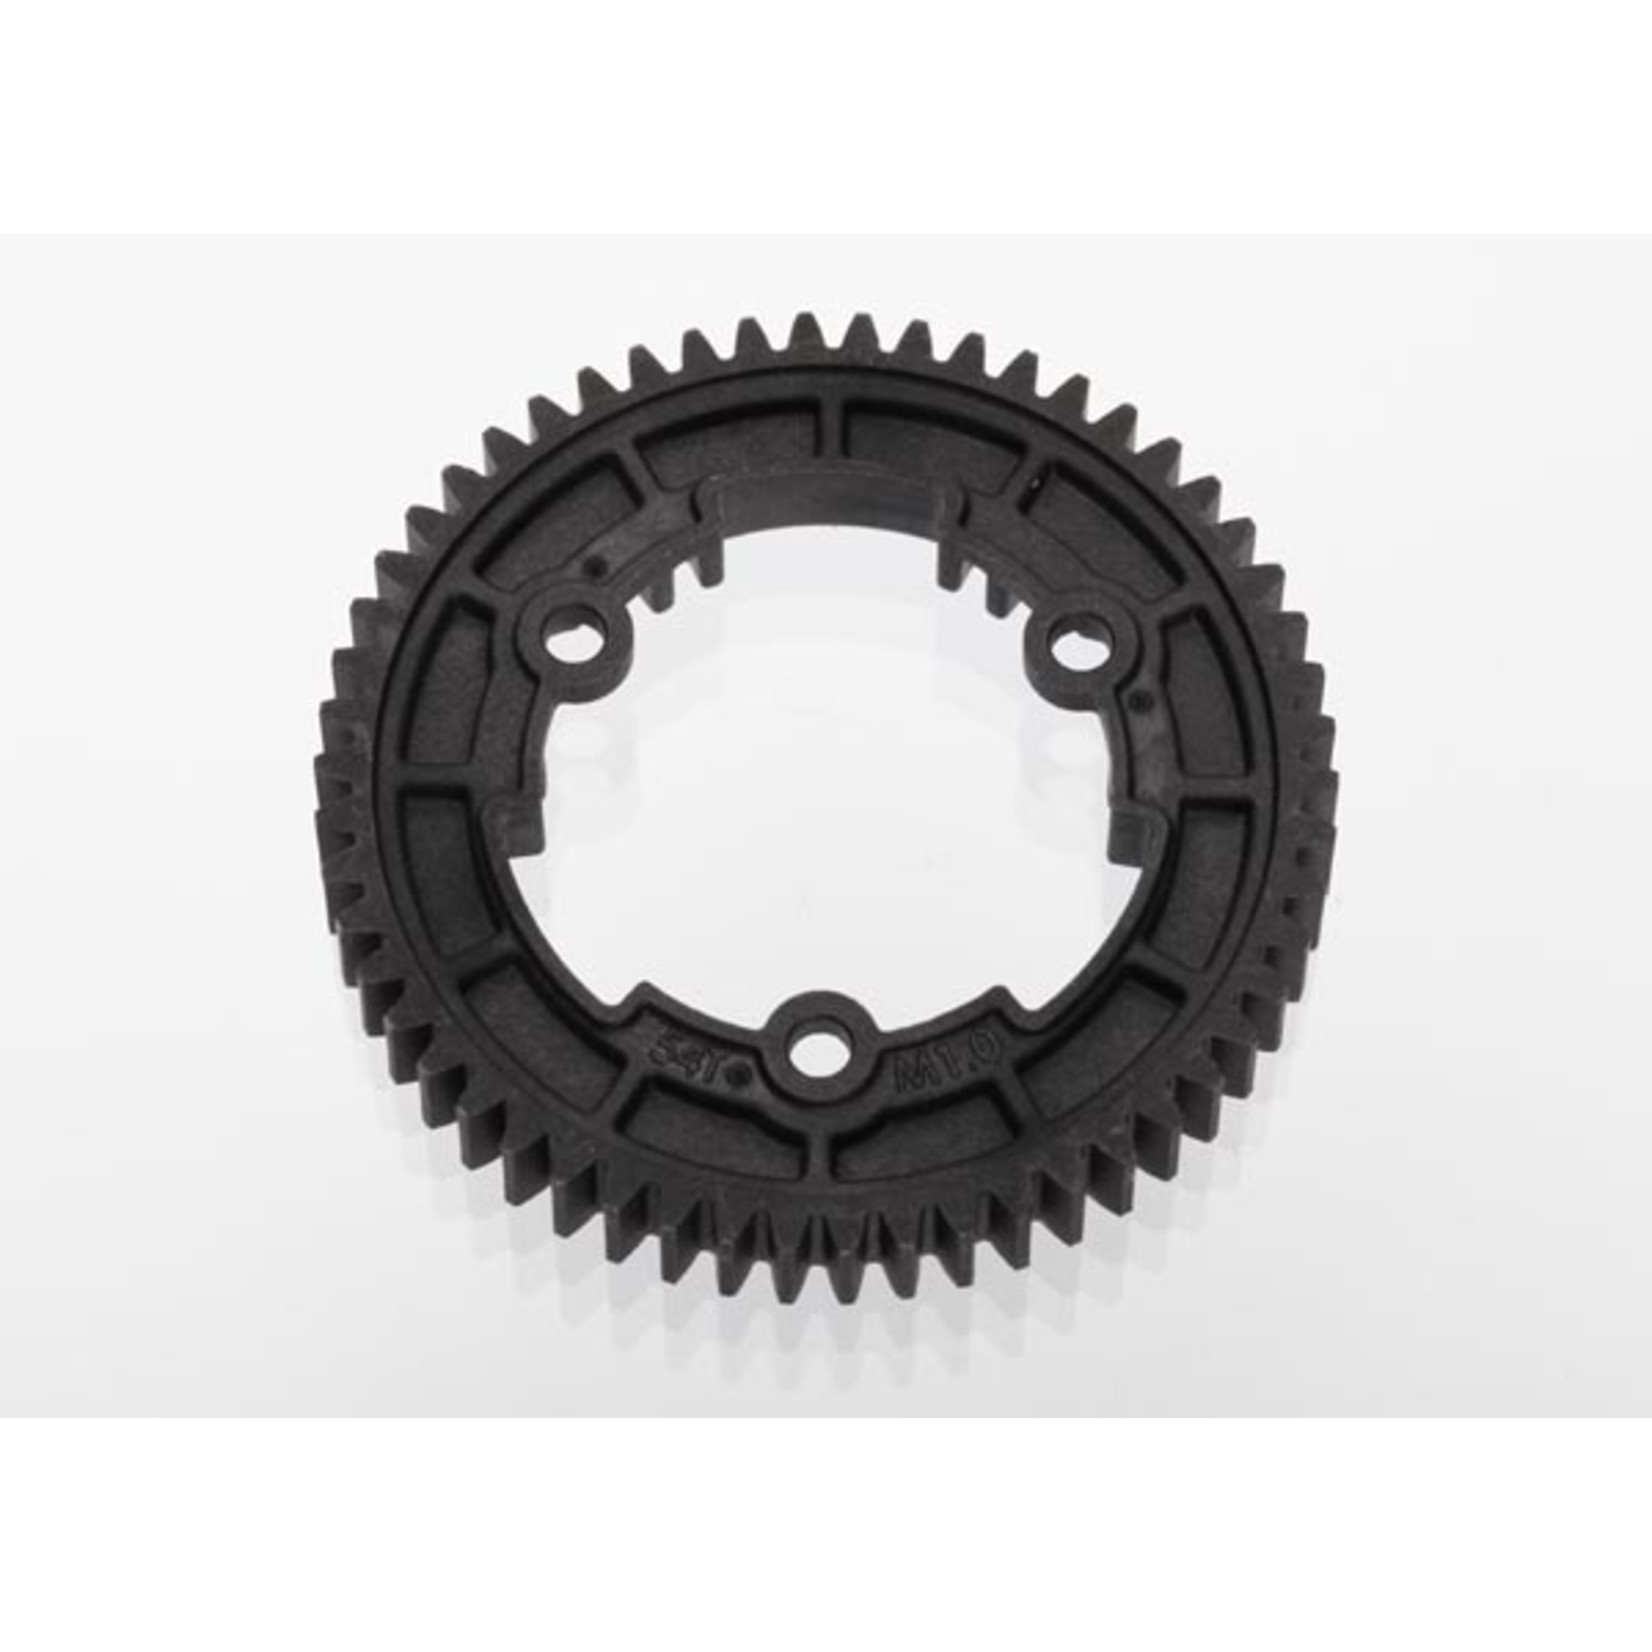 Traxxas 6449 - Spur Gear, 54-tooth (1.0 metric pitch)